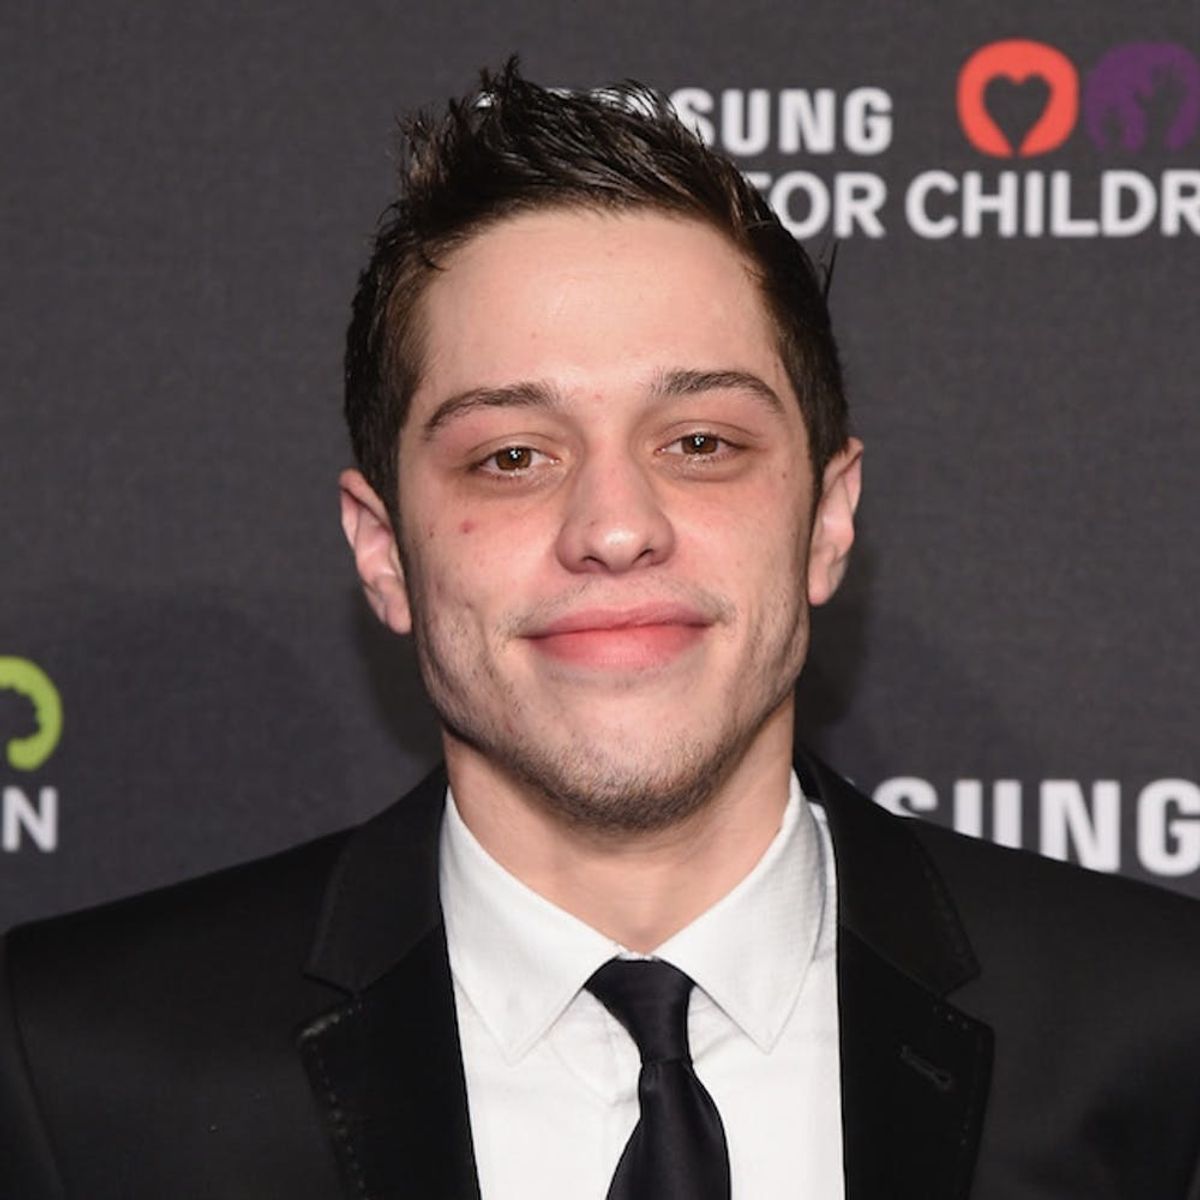 Morning Buzz! SNL’s Pete Davidson Reveals He’s Sober for the First Time in 8 Years + More